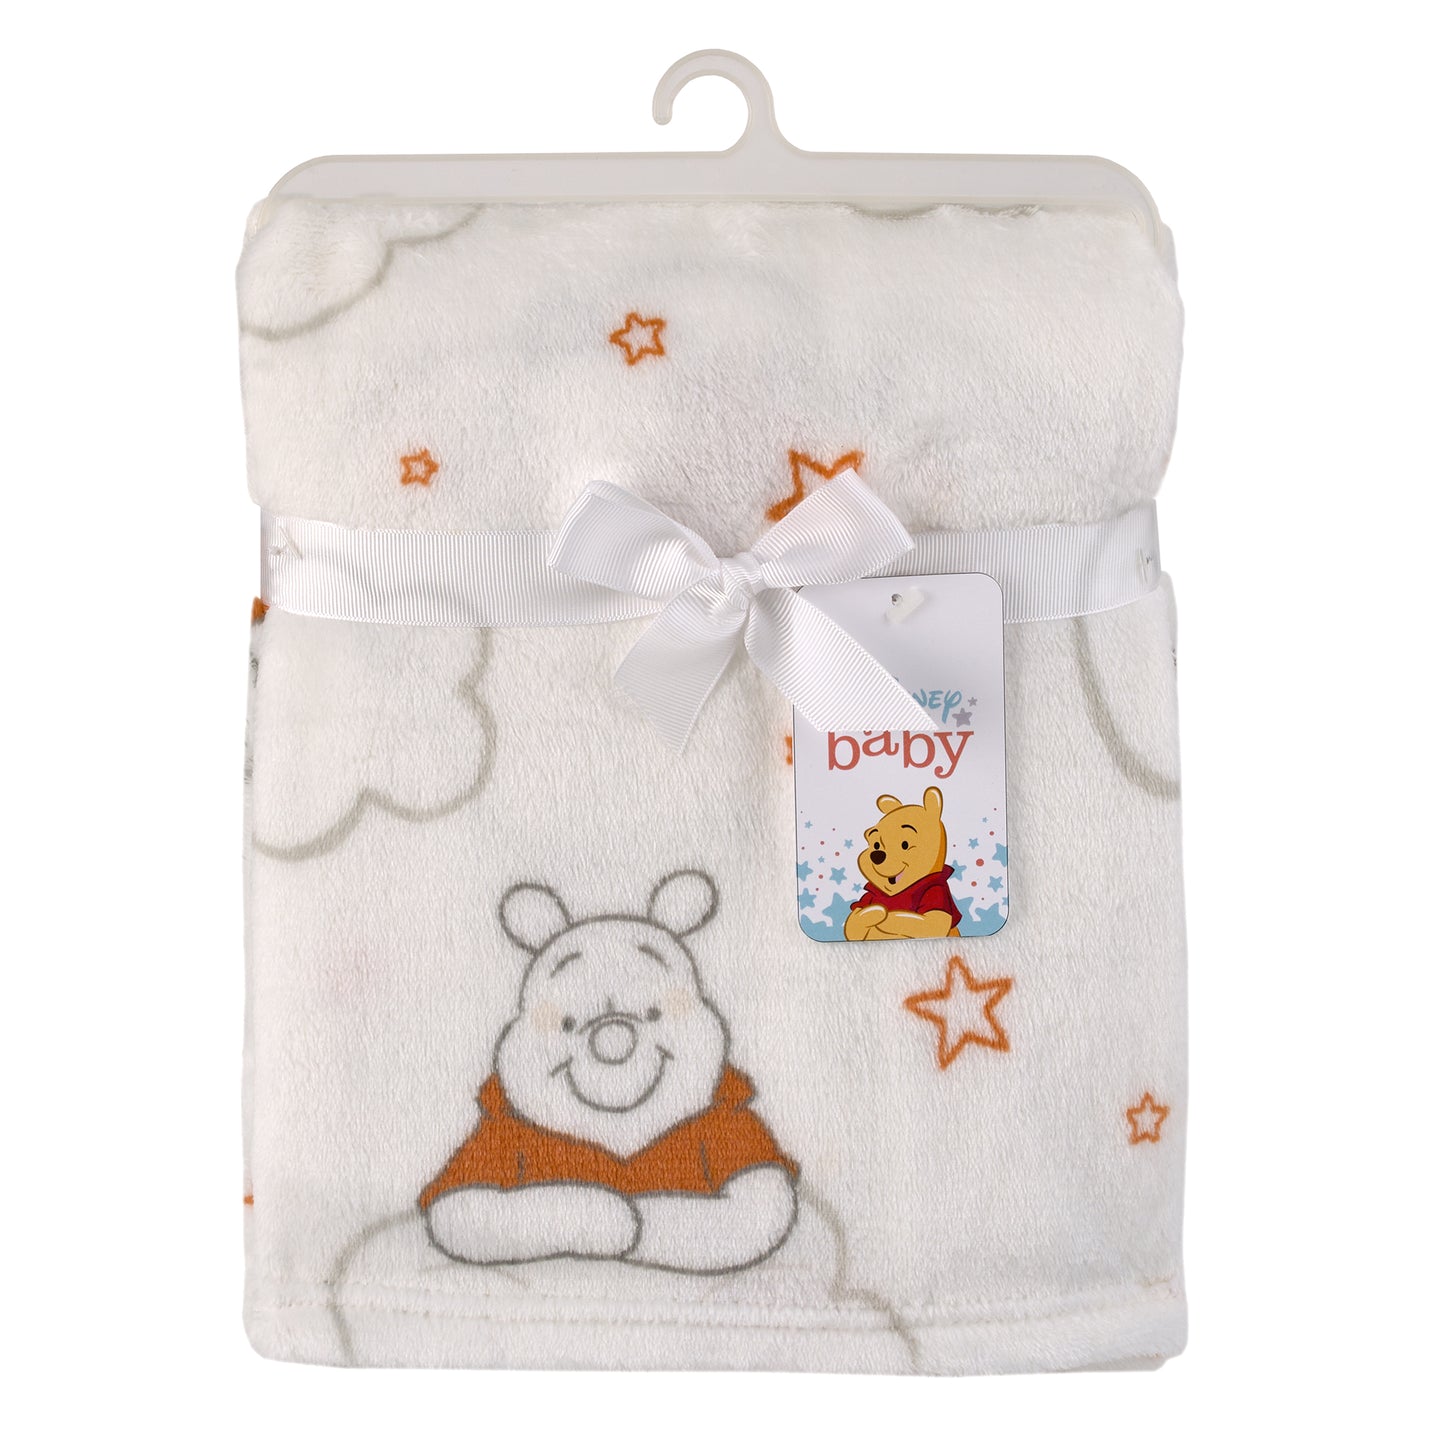 Disney Winnie the Pooh Red and White Clouds Super Soft Baby Blanket